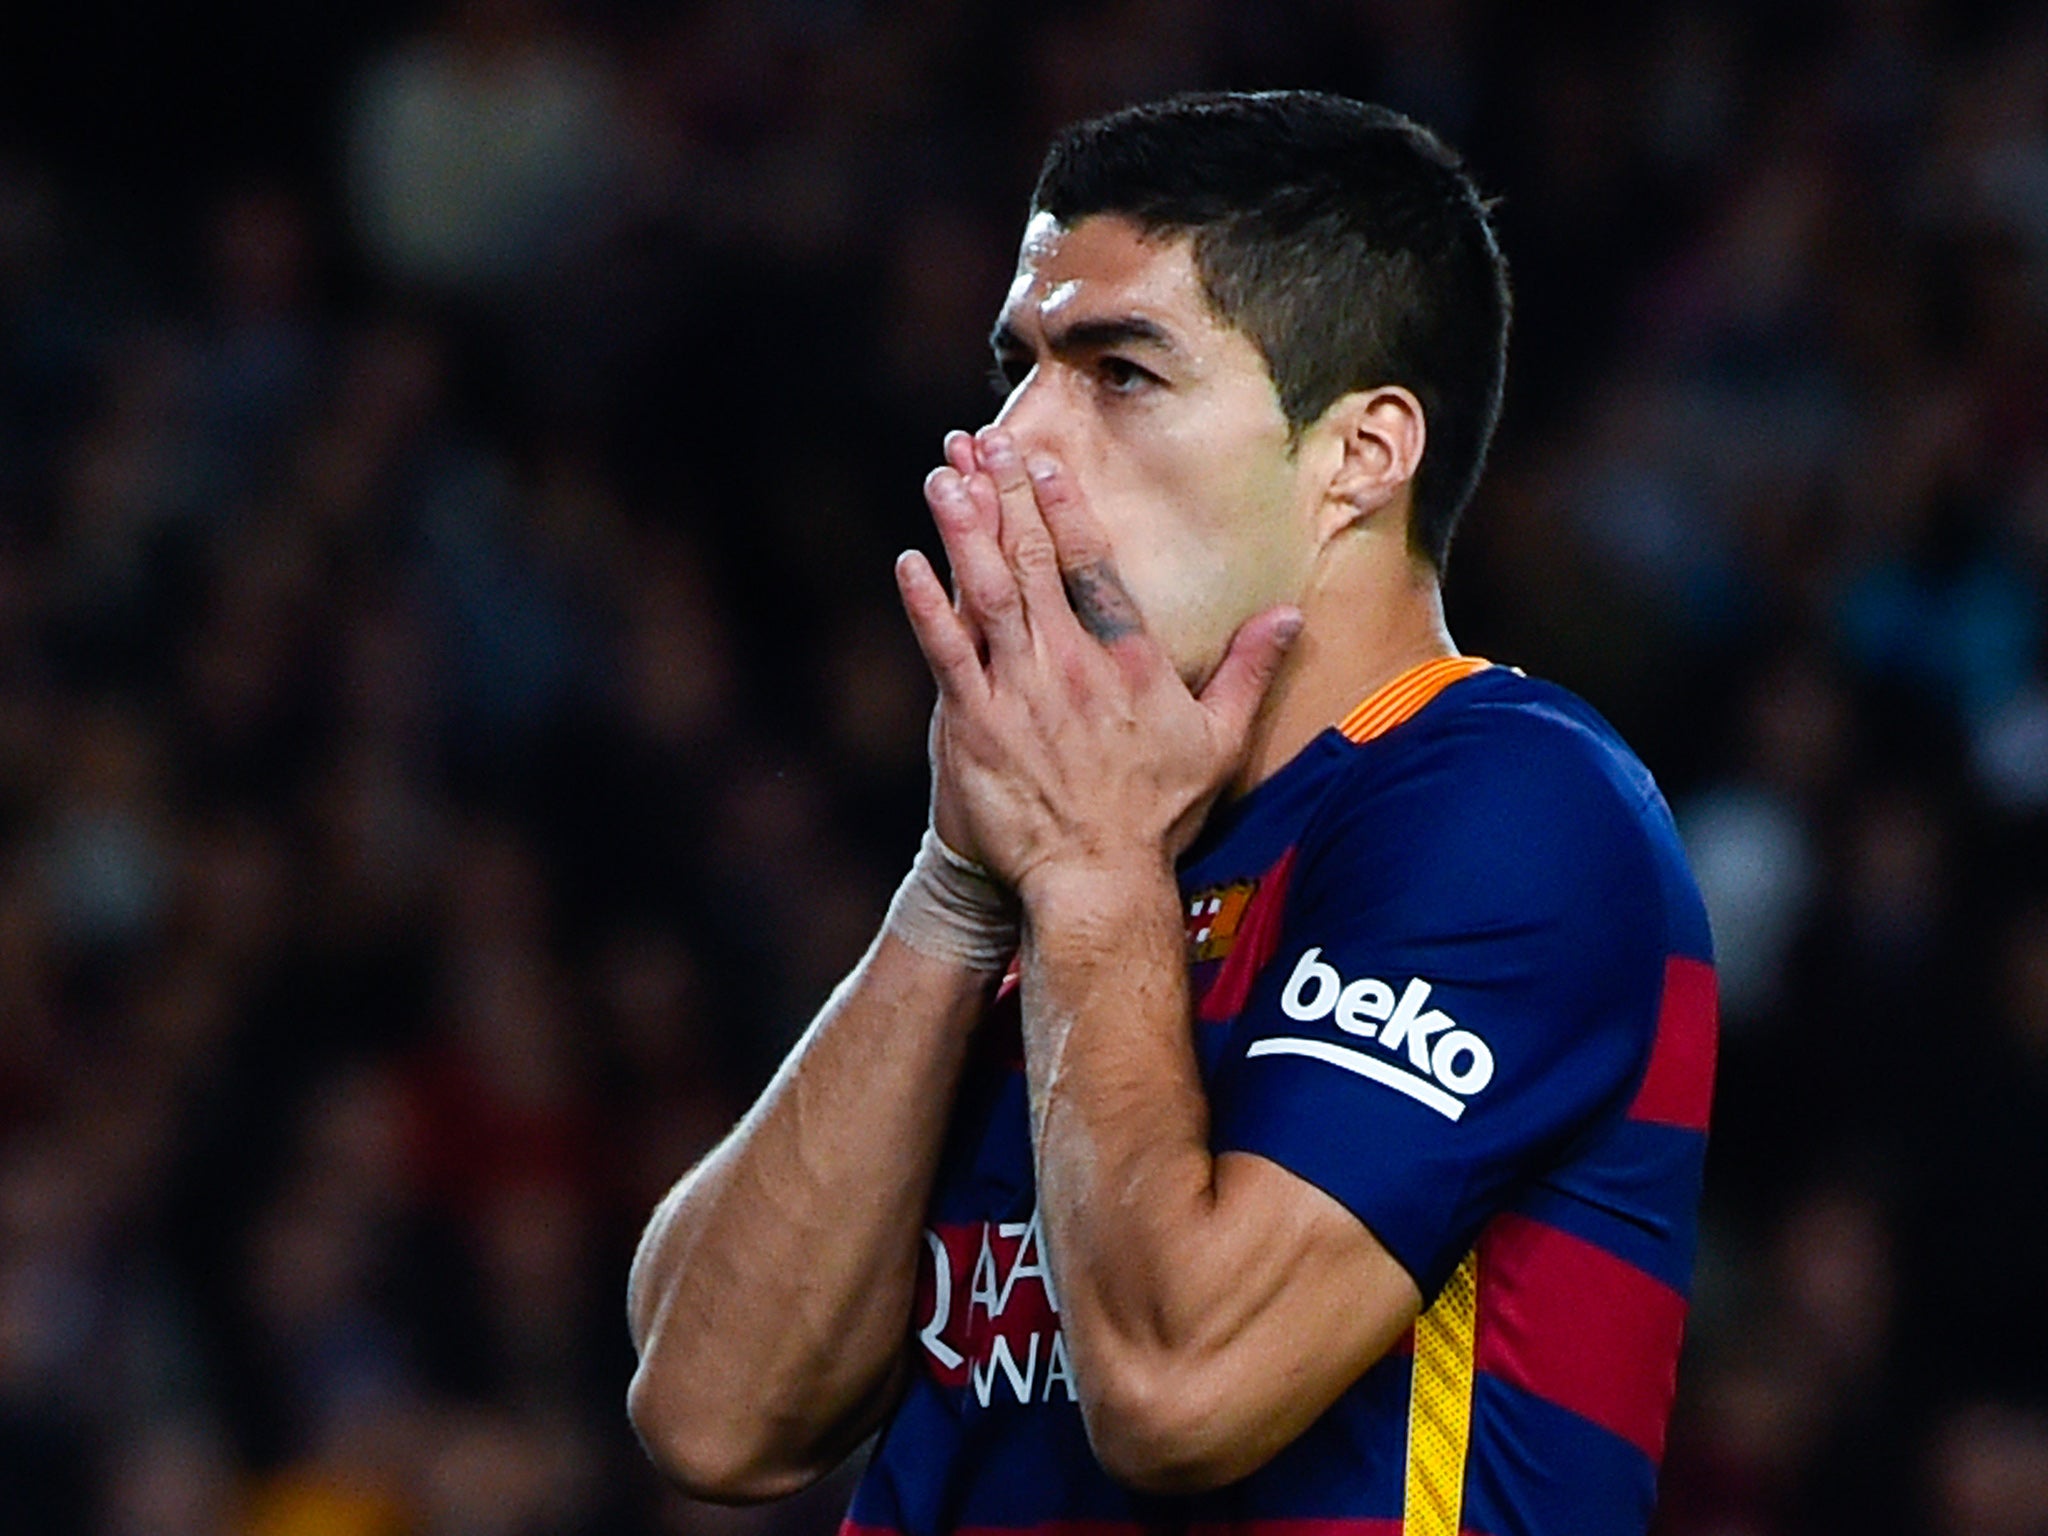 Barcelona forward Luis Suarez reacts to missing a chance against Valencia